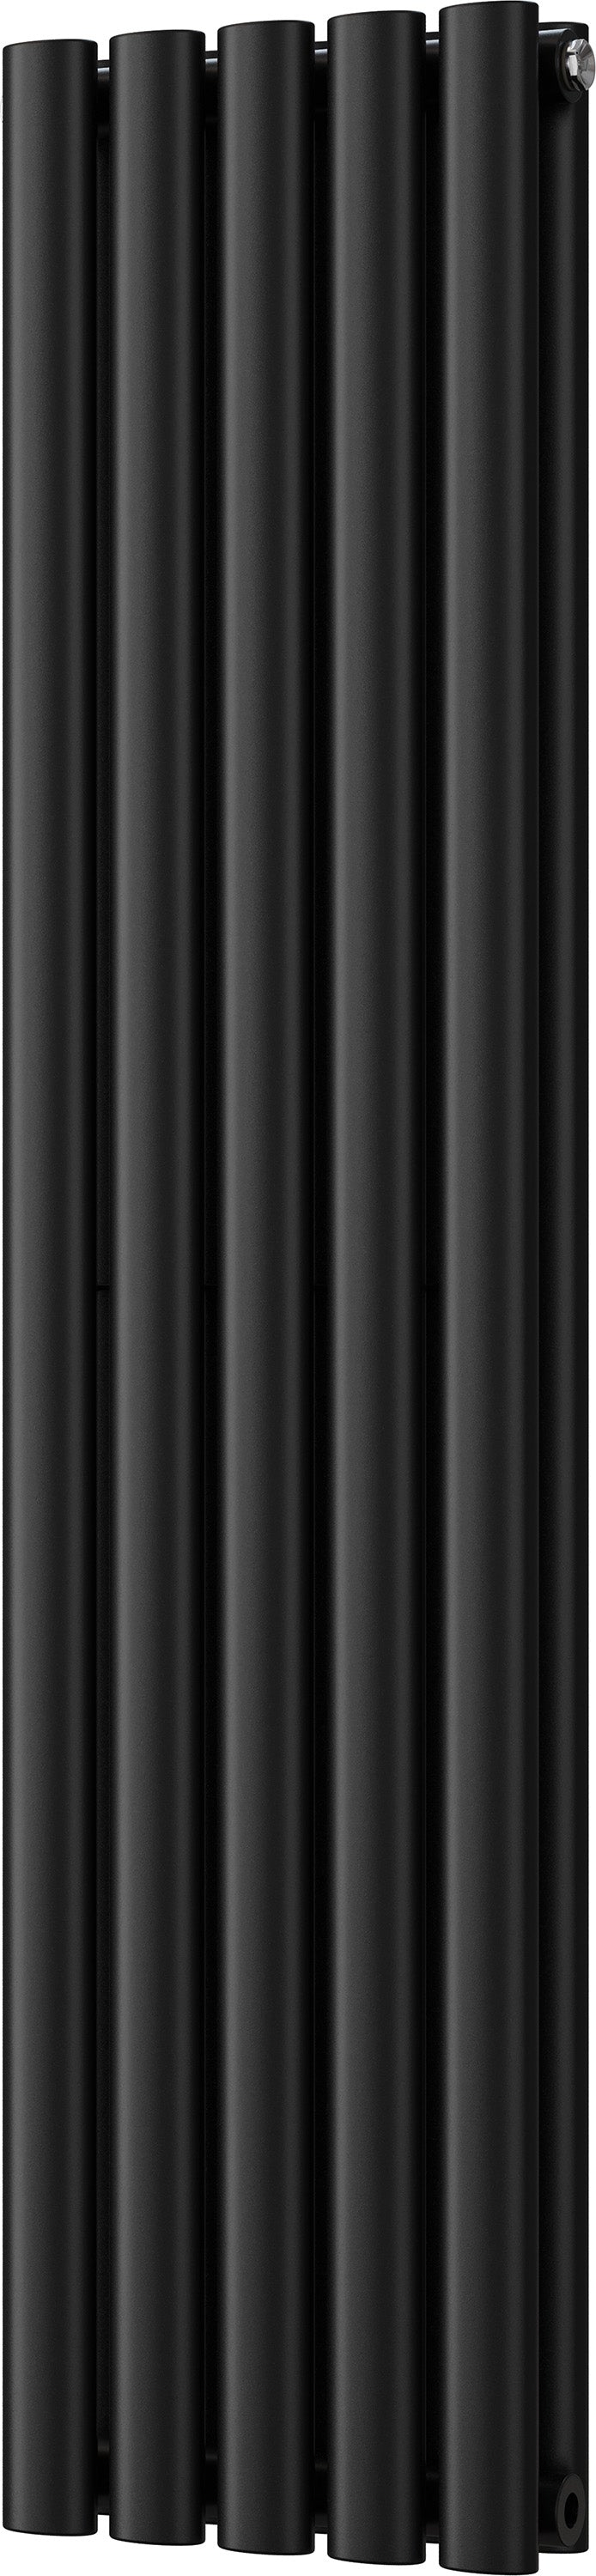 Omeara - Black Vertical Radiator H1200mm x W290mm Double Panel